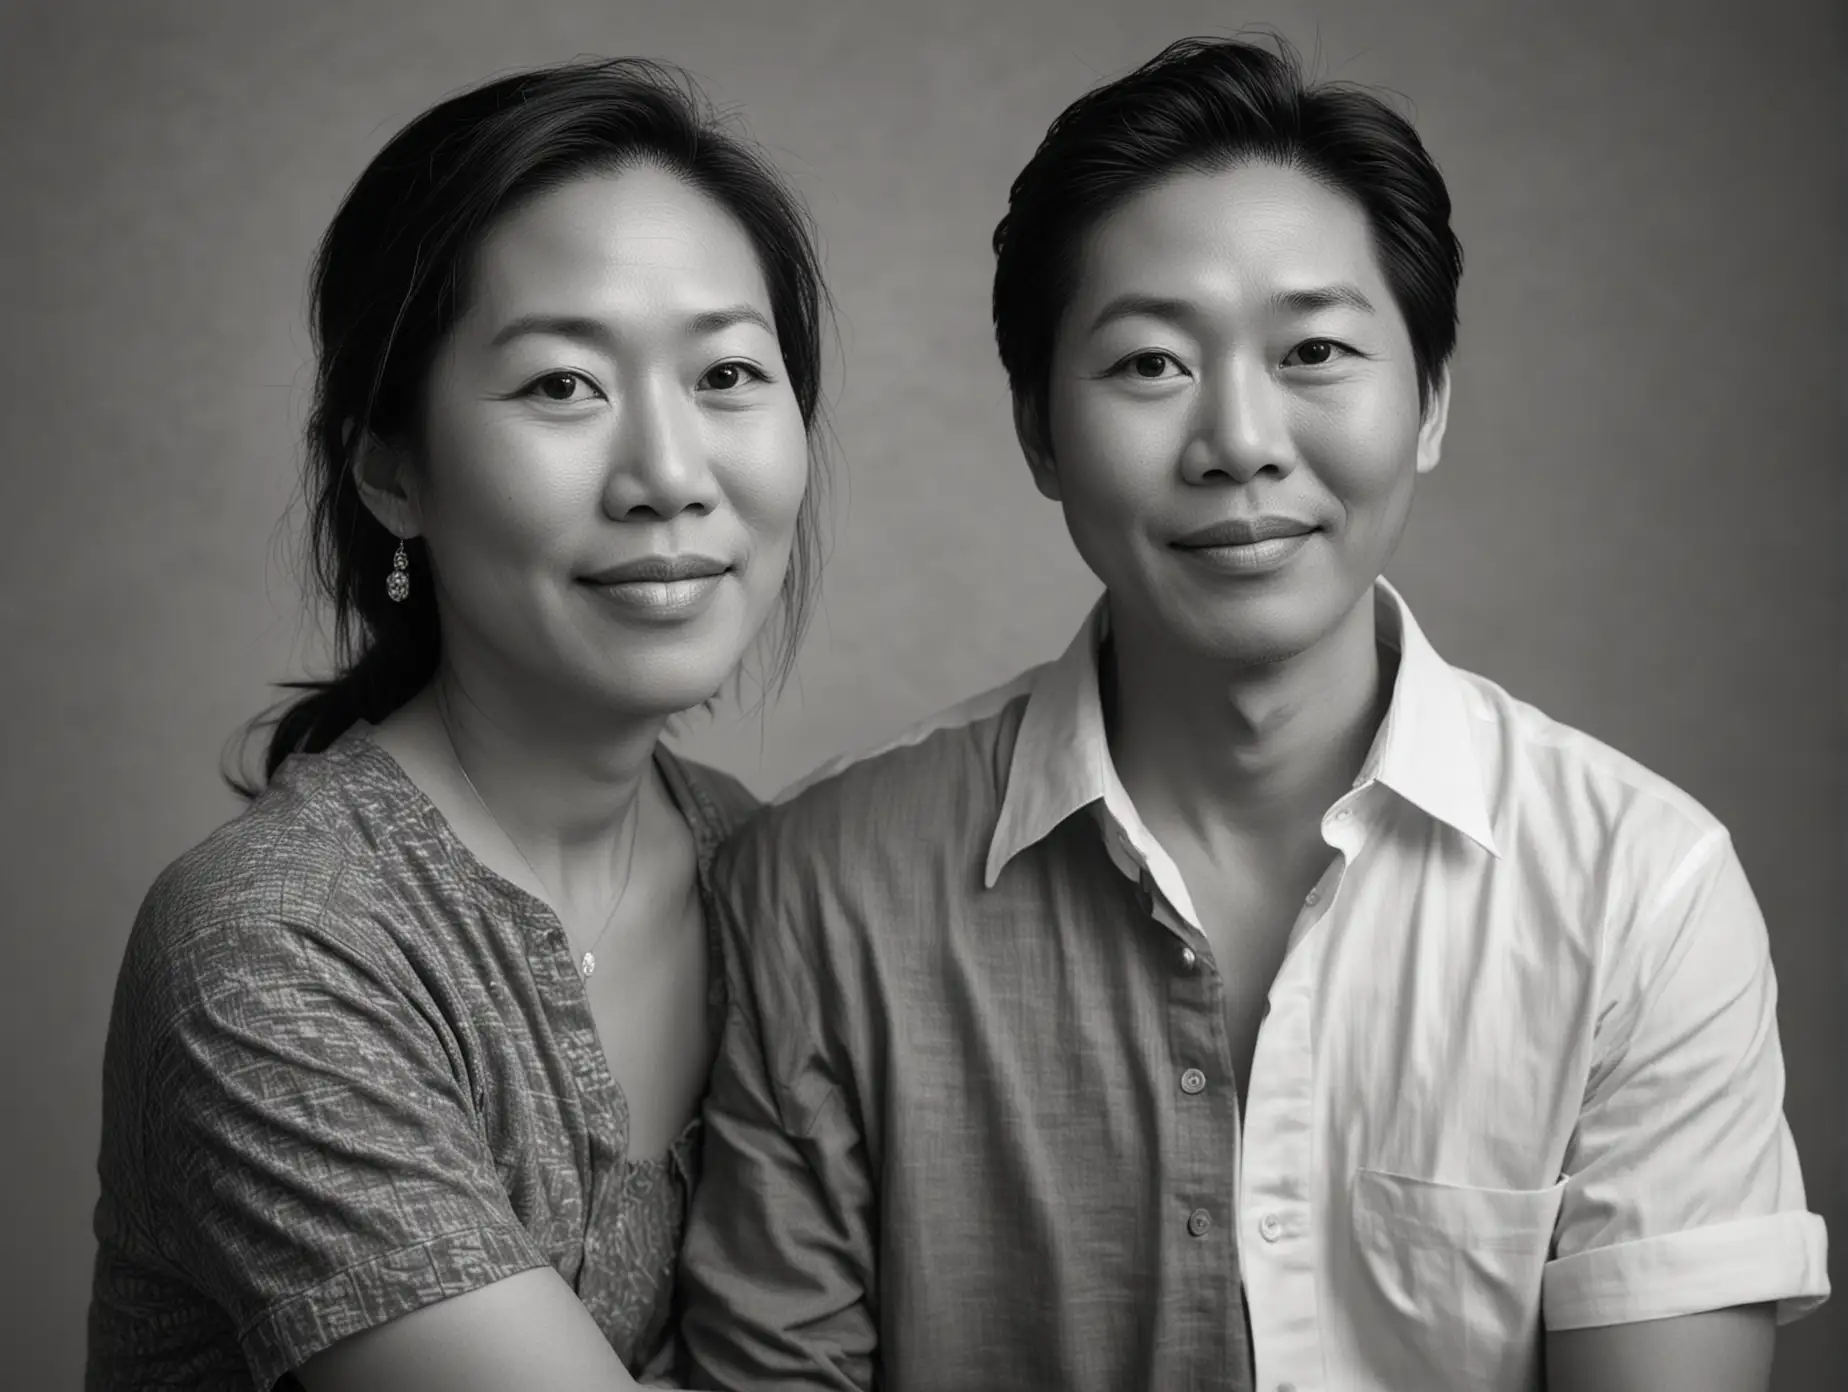 realistic black and white photo of a casually dressed middle-aged heterosexual married Asian-American couple conveying their commitment to a noble cause